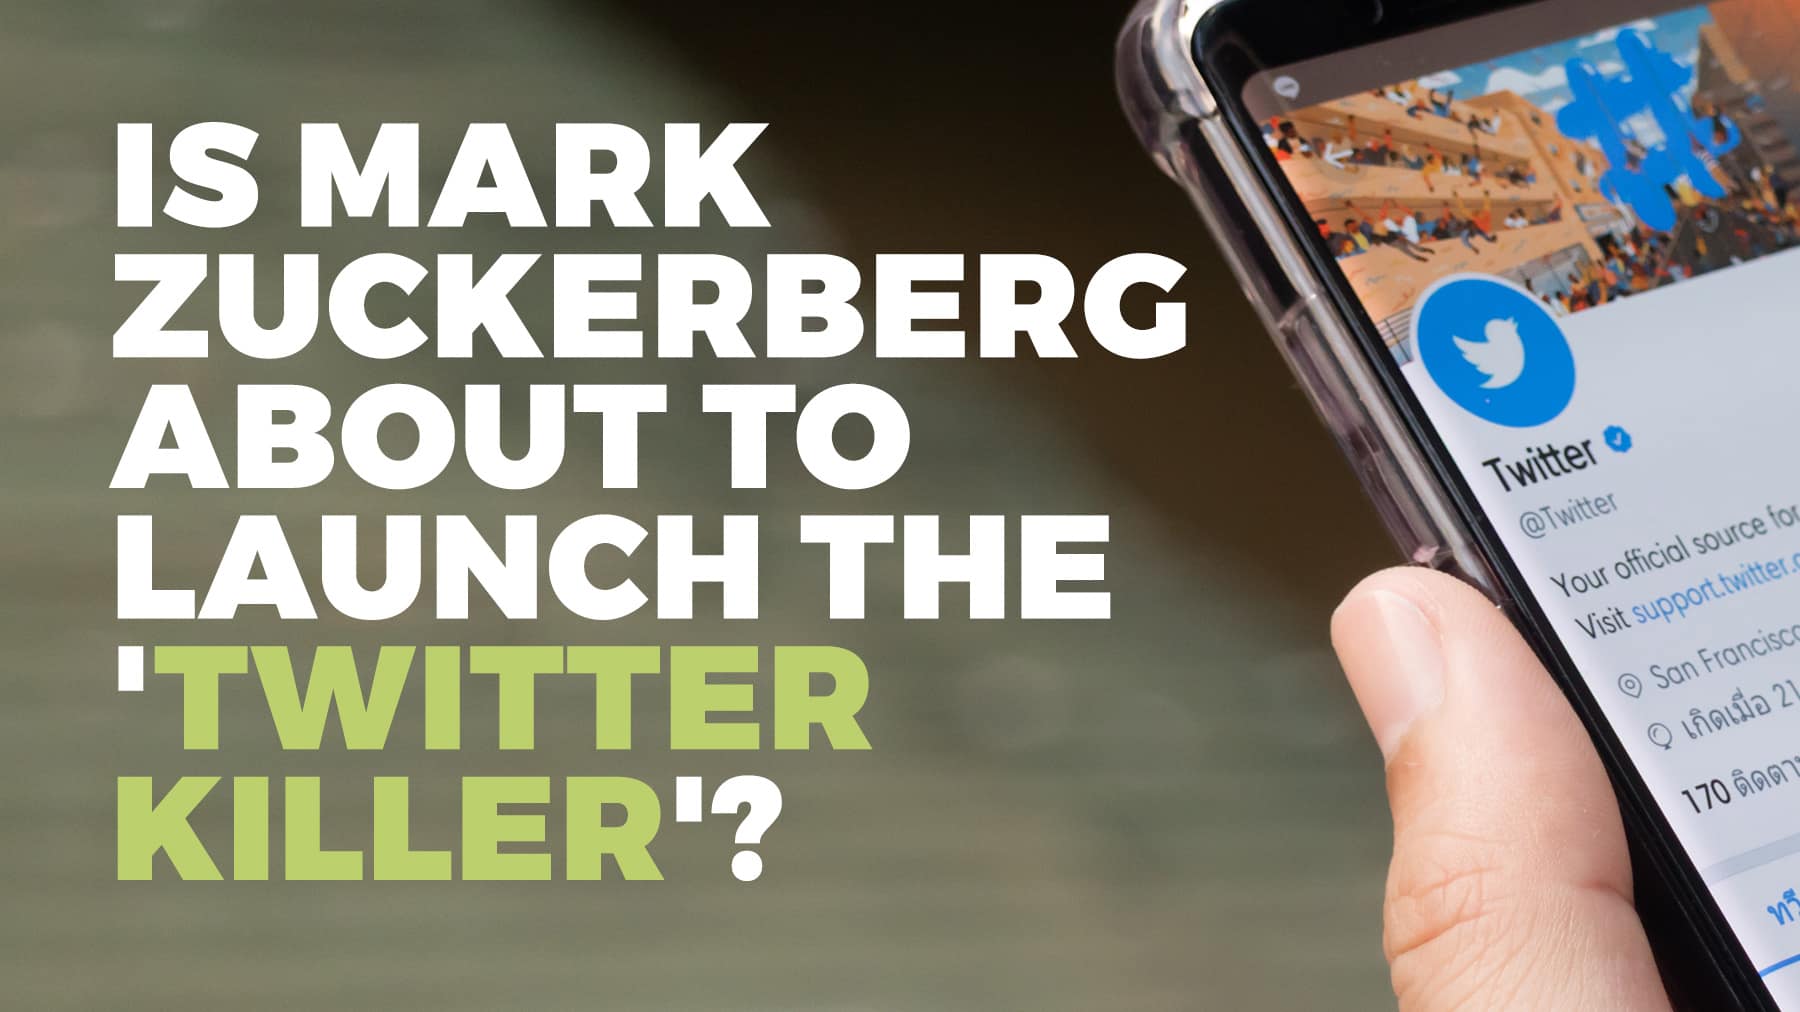 Is Mark Zuckerberg about to launch the ‘Twitter Killer’?